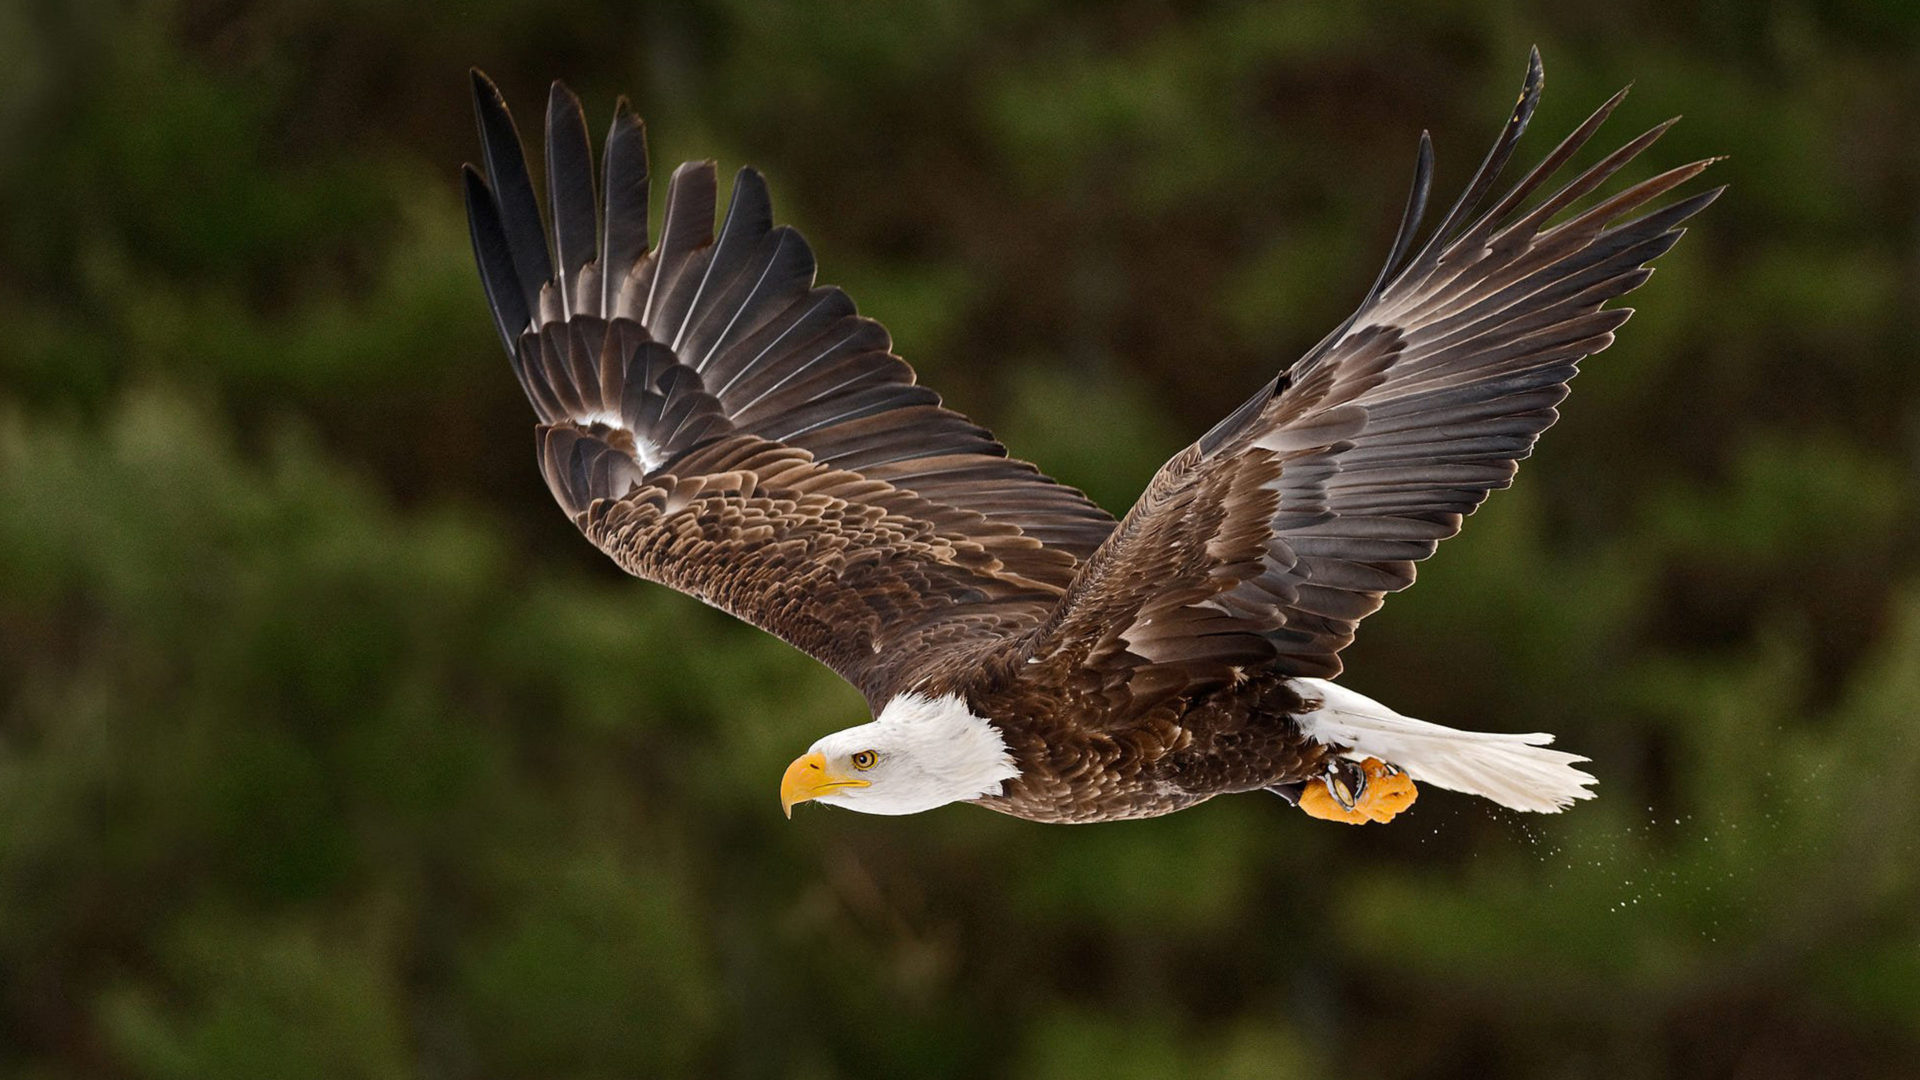 Bald eagle in flight, Spread wings, Stretched claws, Powerful presence, 1920x1080 Full HD Desktop